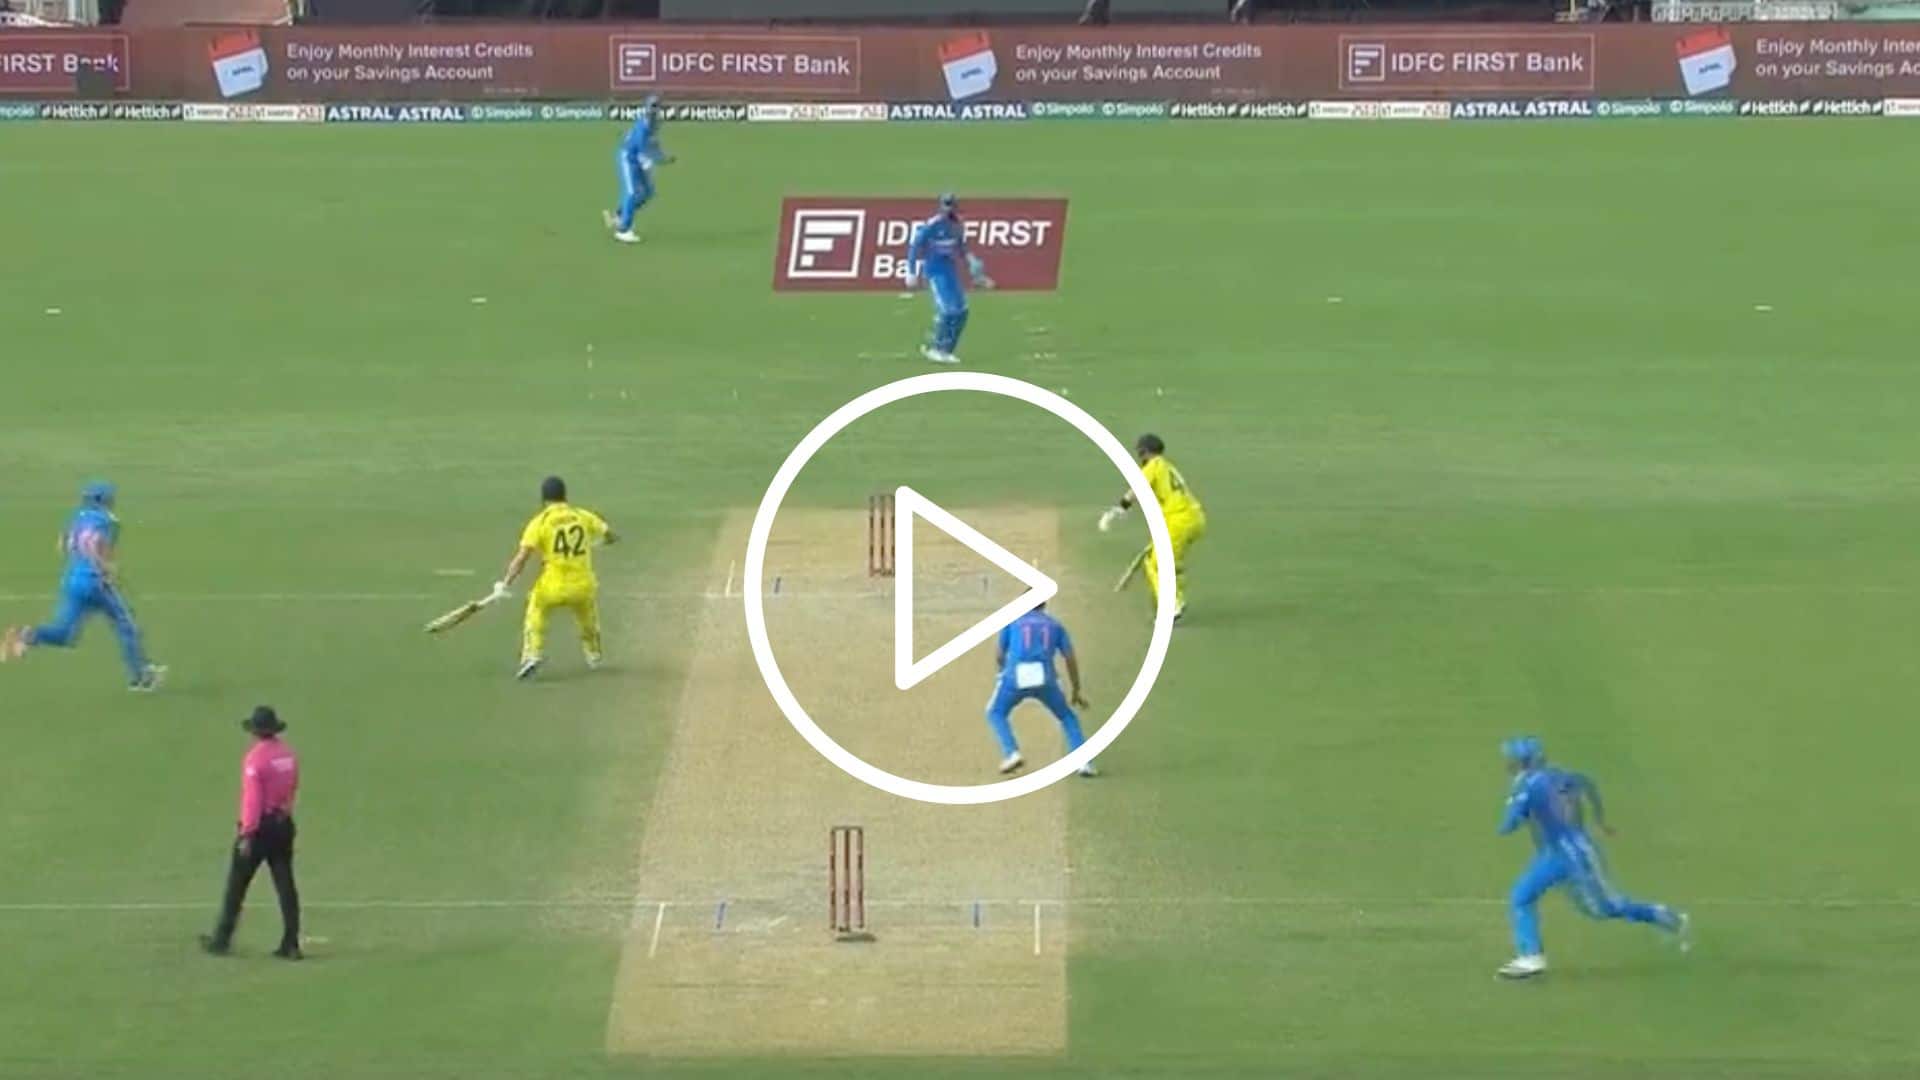 [Watch] SKY Saves KL Rahul’s Woe With Sharp Run-Out After Rare Aussie Mix-Up